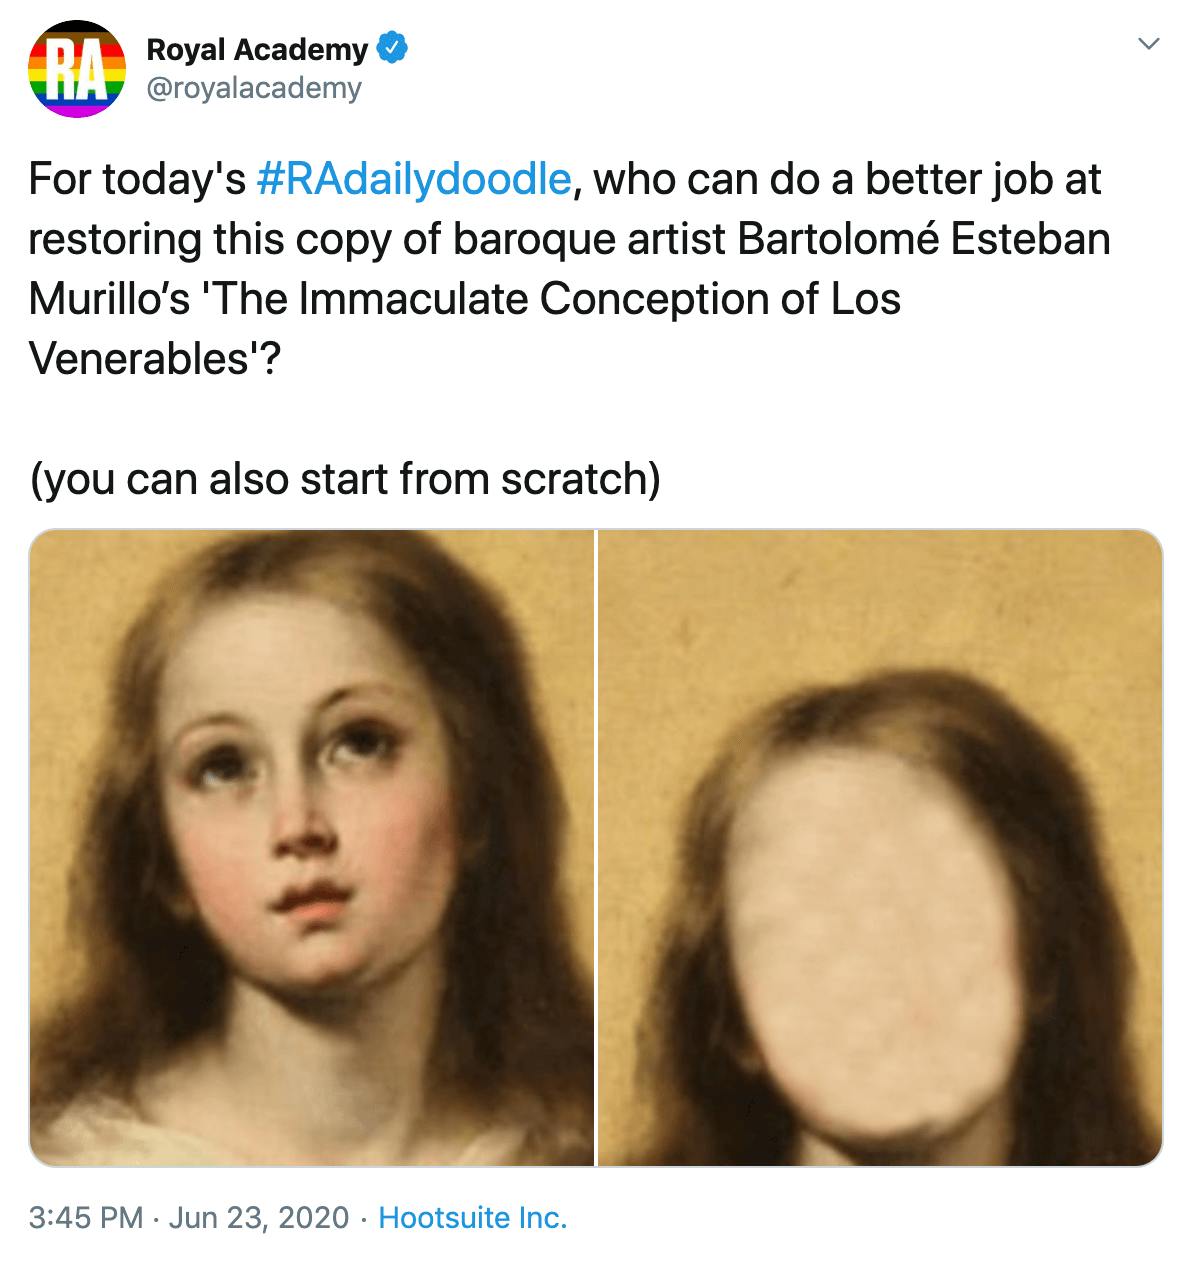 Tweet saying "For today's #RAdailydoodle, who can do a better job at restoring this copy of baroque artist Bartolomé Esteban Murillo’s 'The Immaculate Conception of Los Venerables'?  (you can also start from scratch)" with image of the original and a blank faced version side by side each other